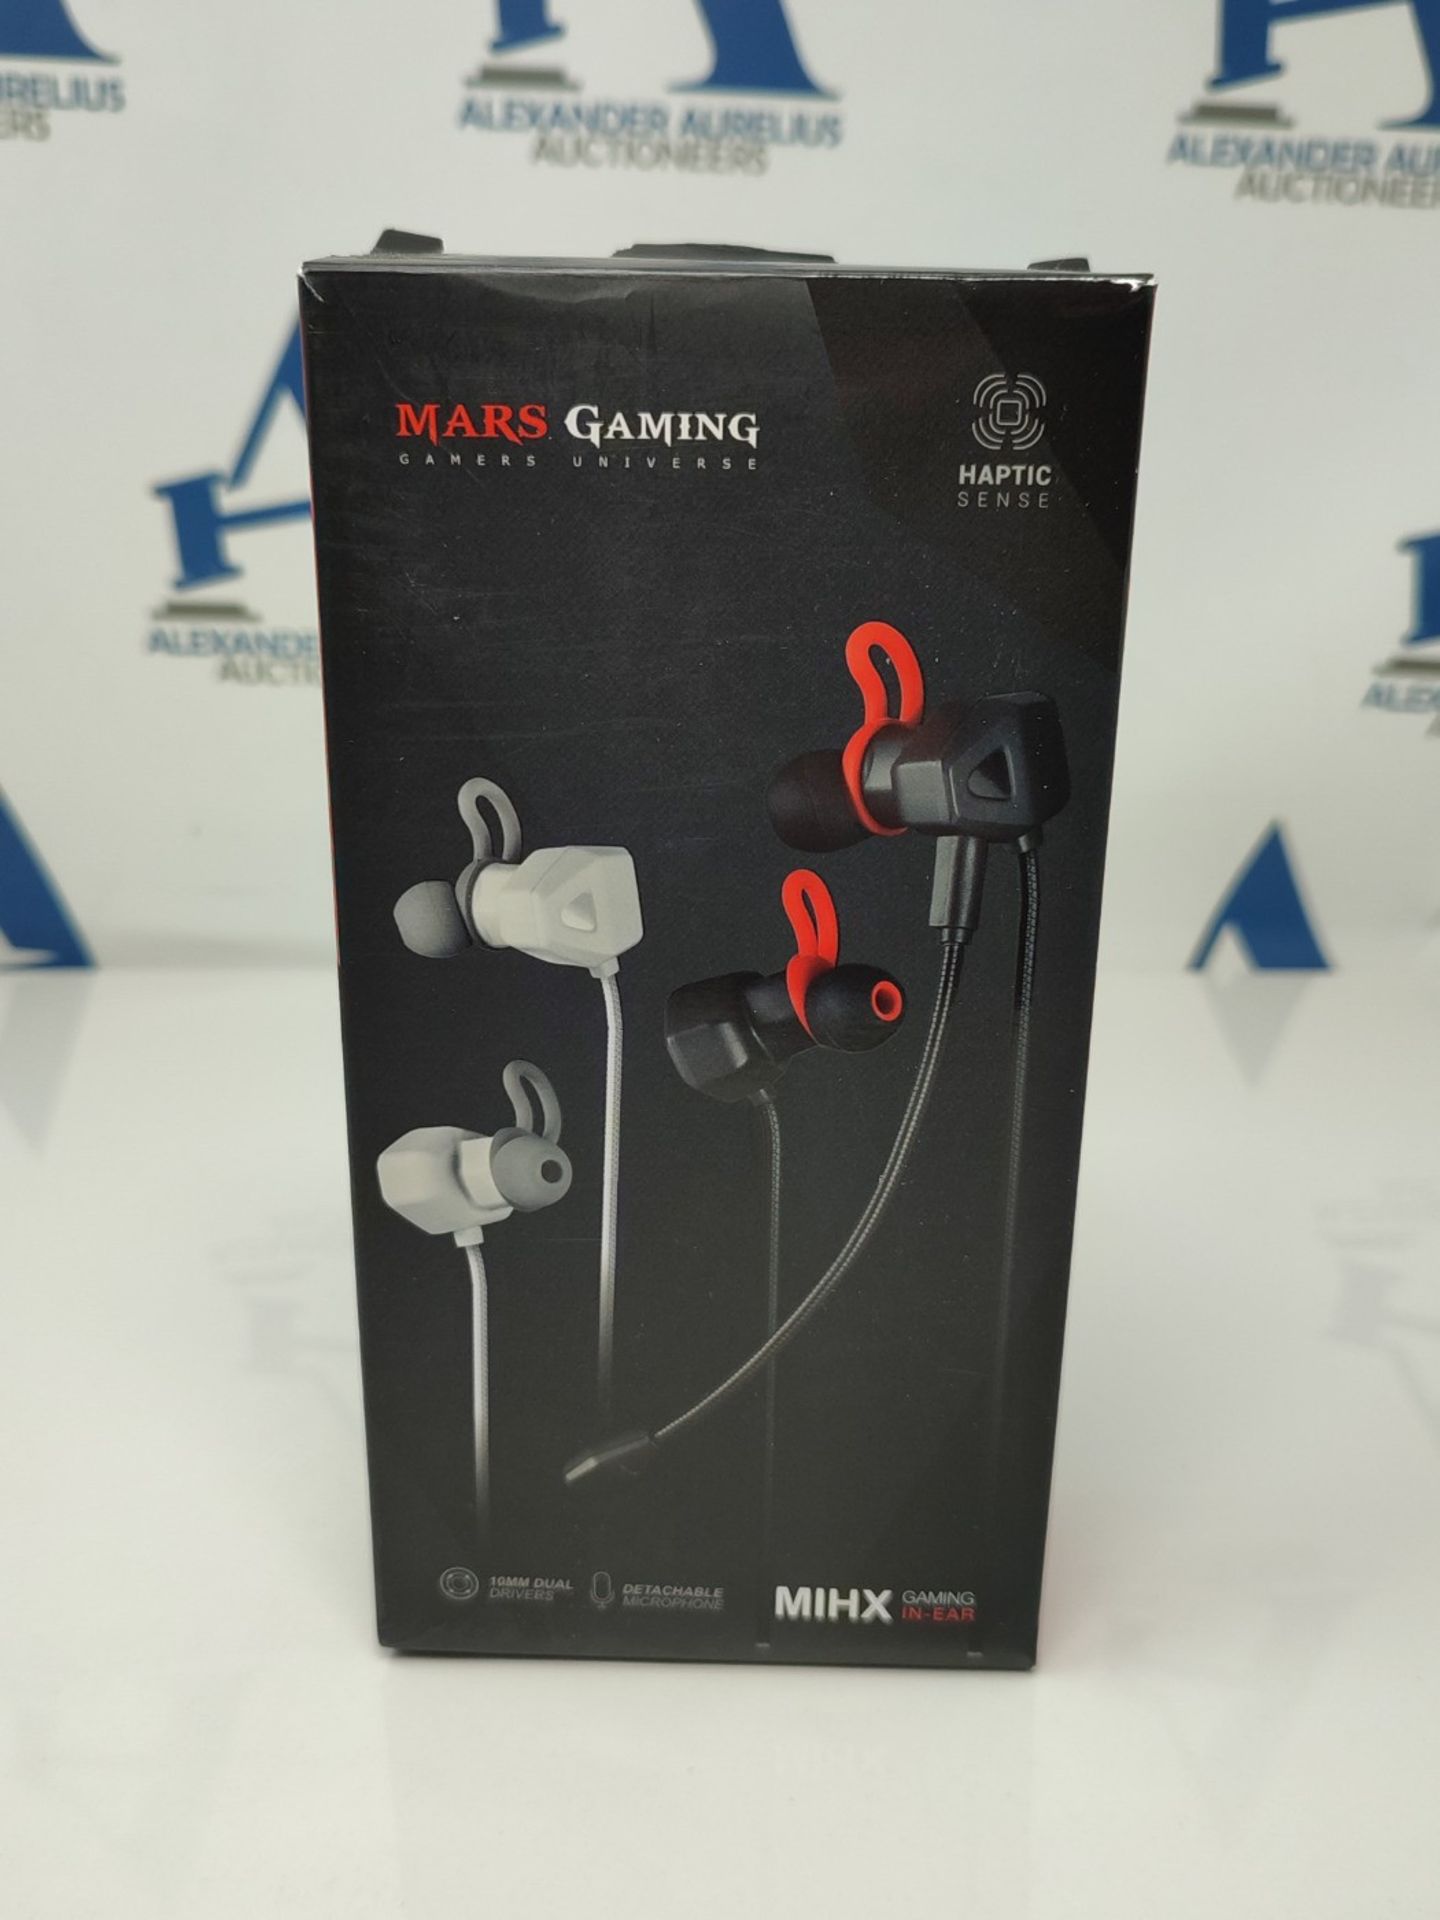 IN-EAR EARPHONE WITH MICROPHONE FOR GAMING MARS GAMING MIHX WHITE - Image 2 of 3